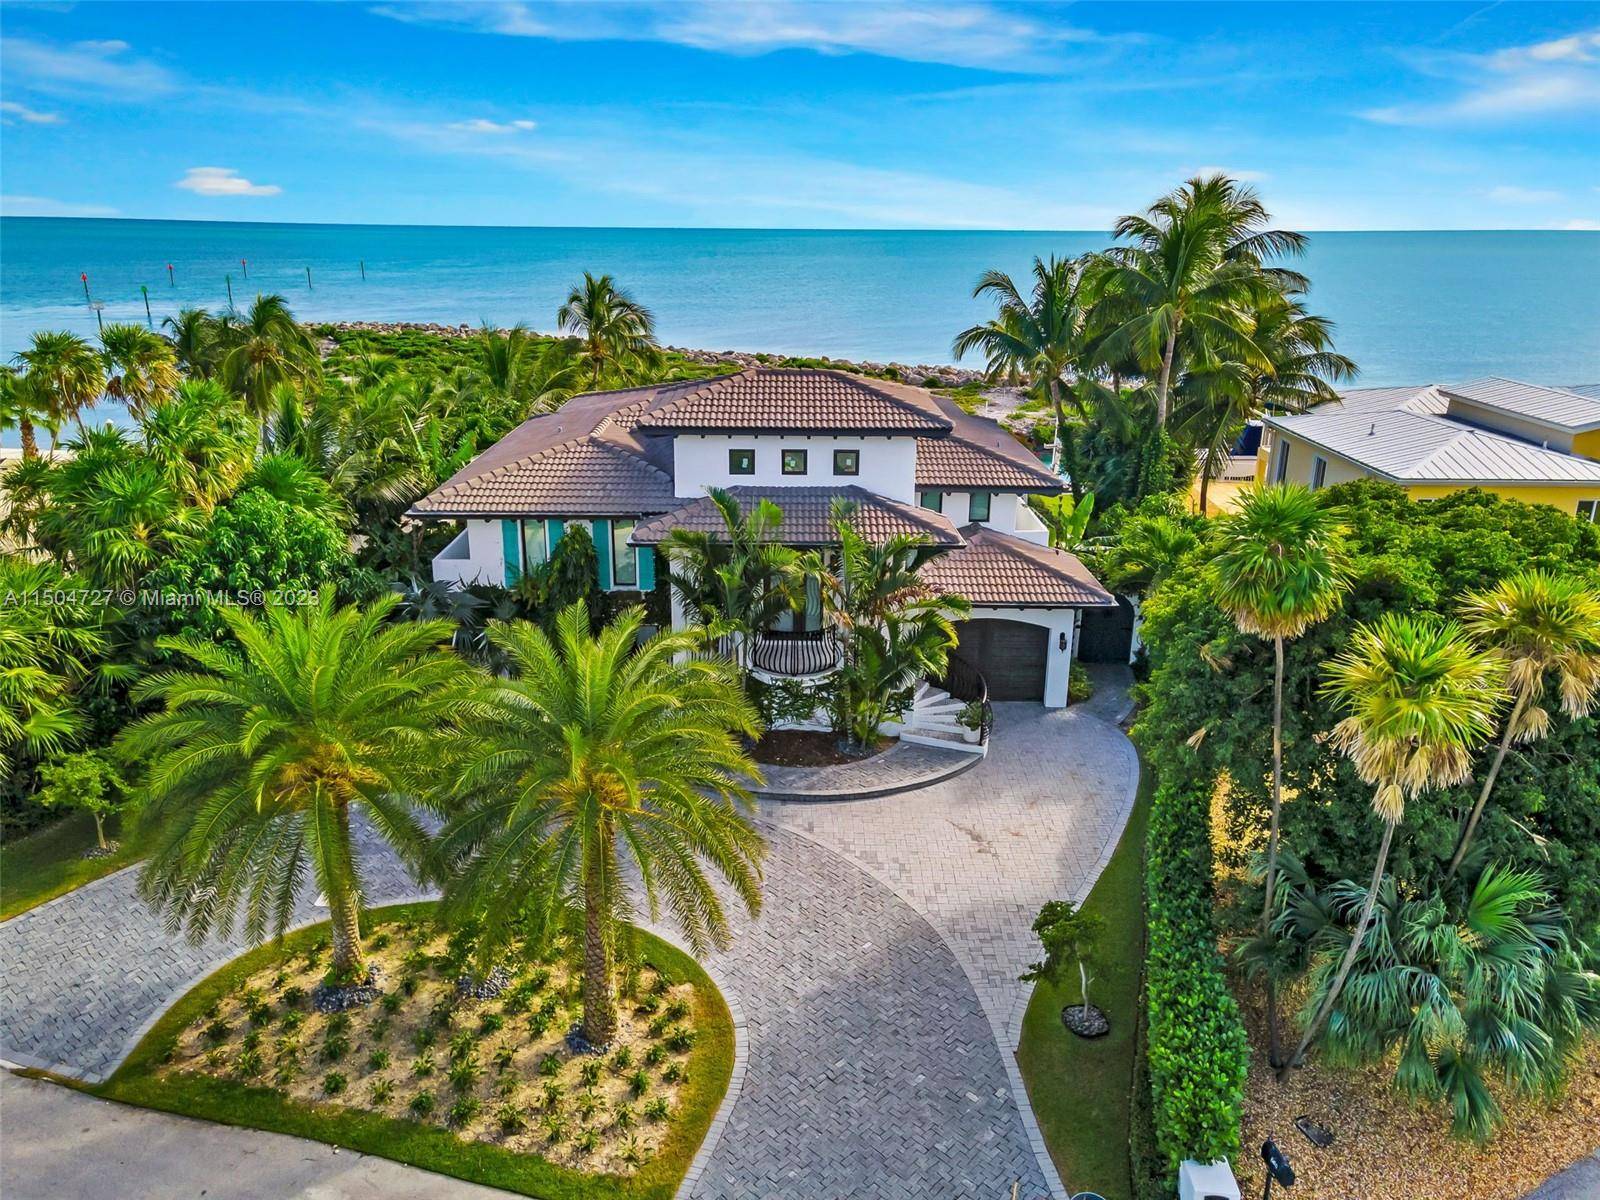 Welcome to Casa Torini, a stunning Greek inspired paradise located in the beautiful Duck Key, Florida !